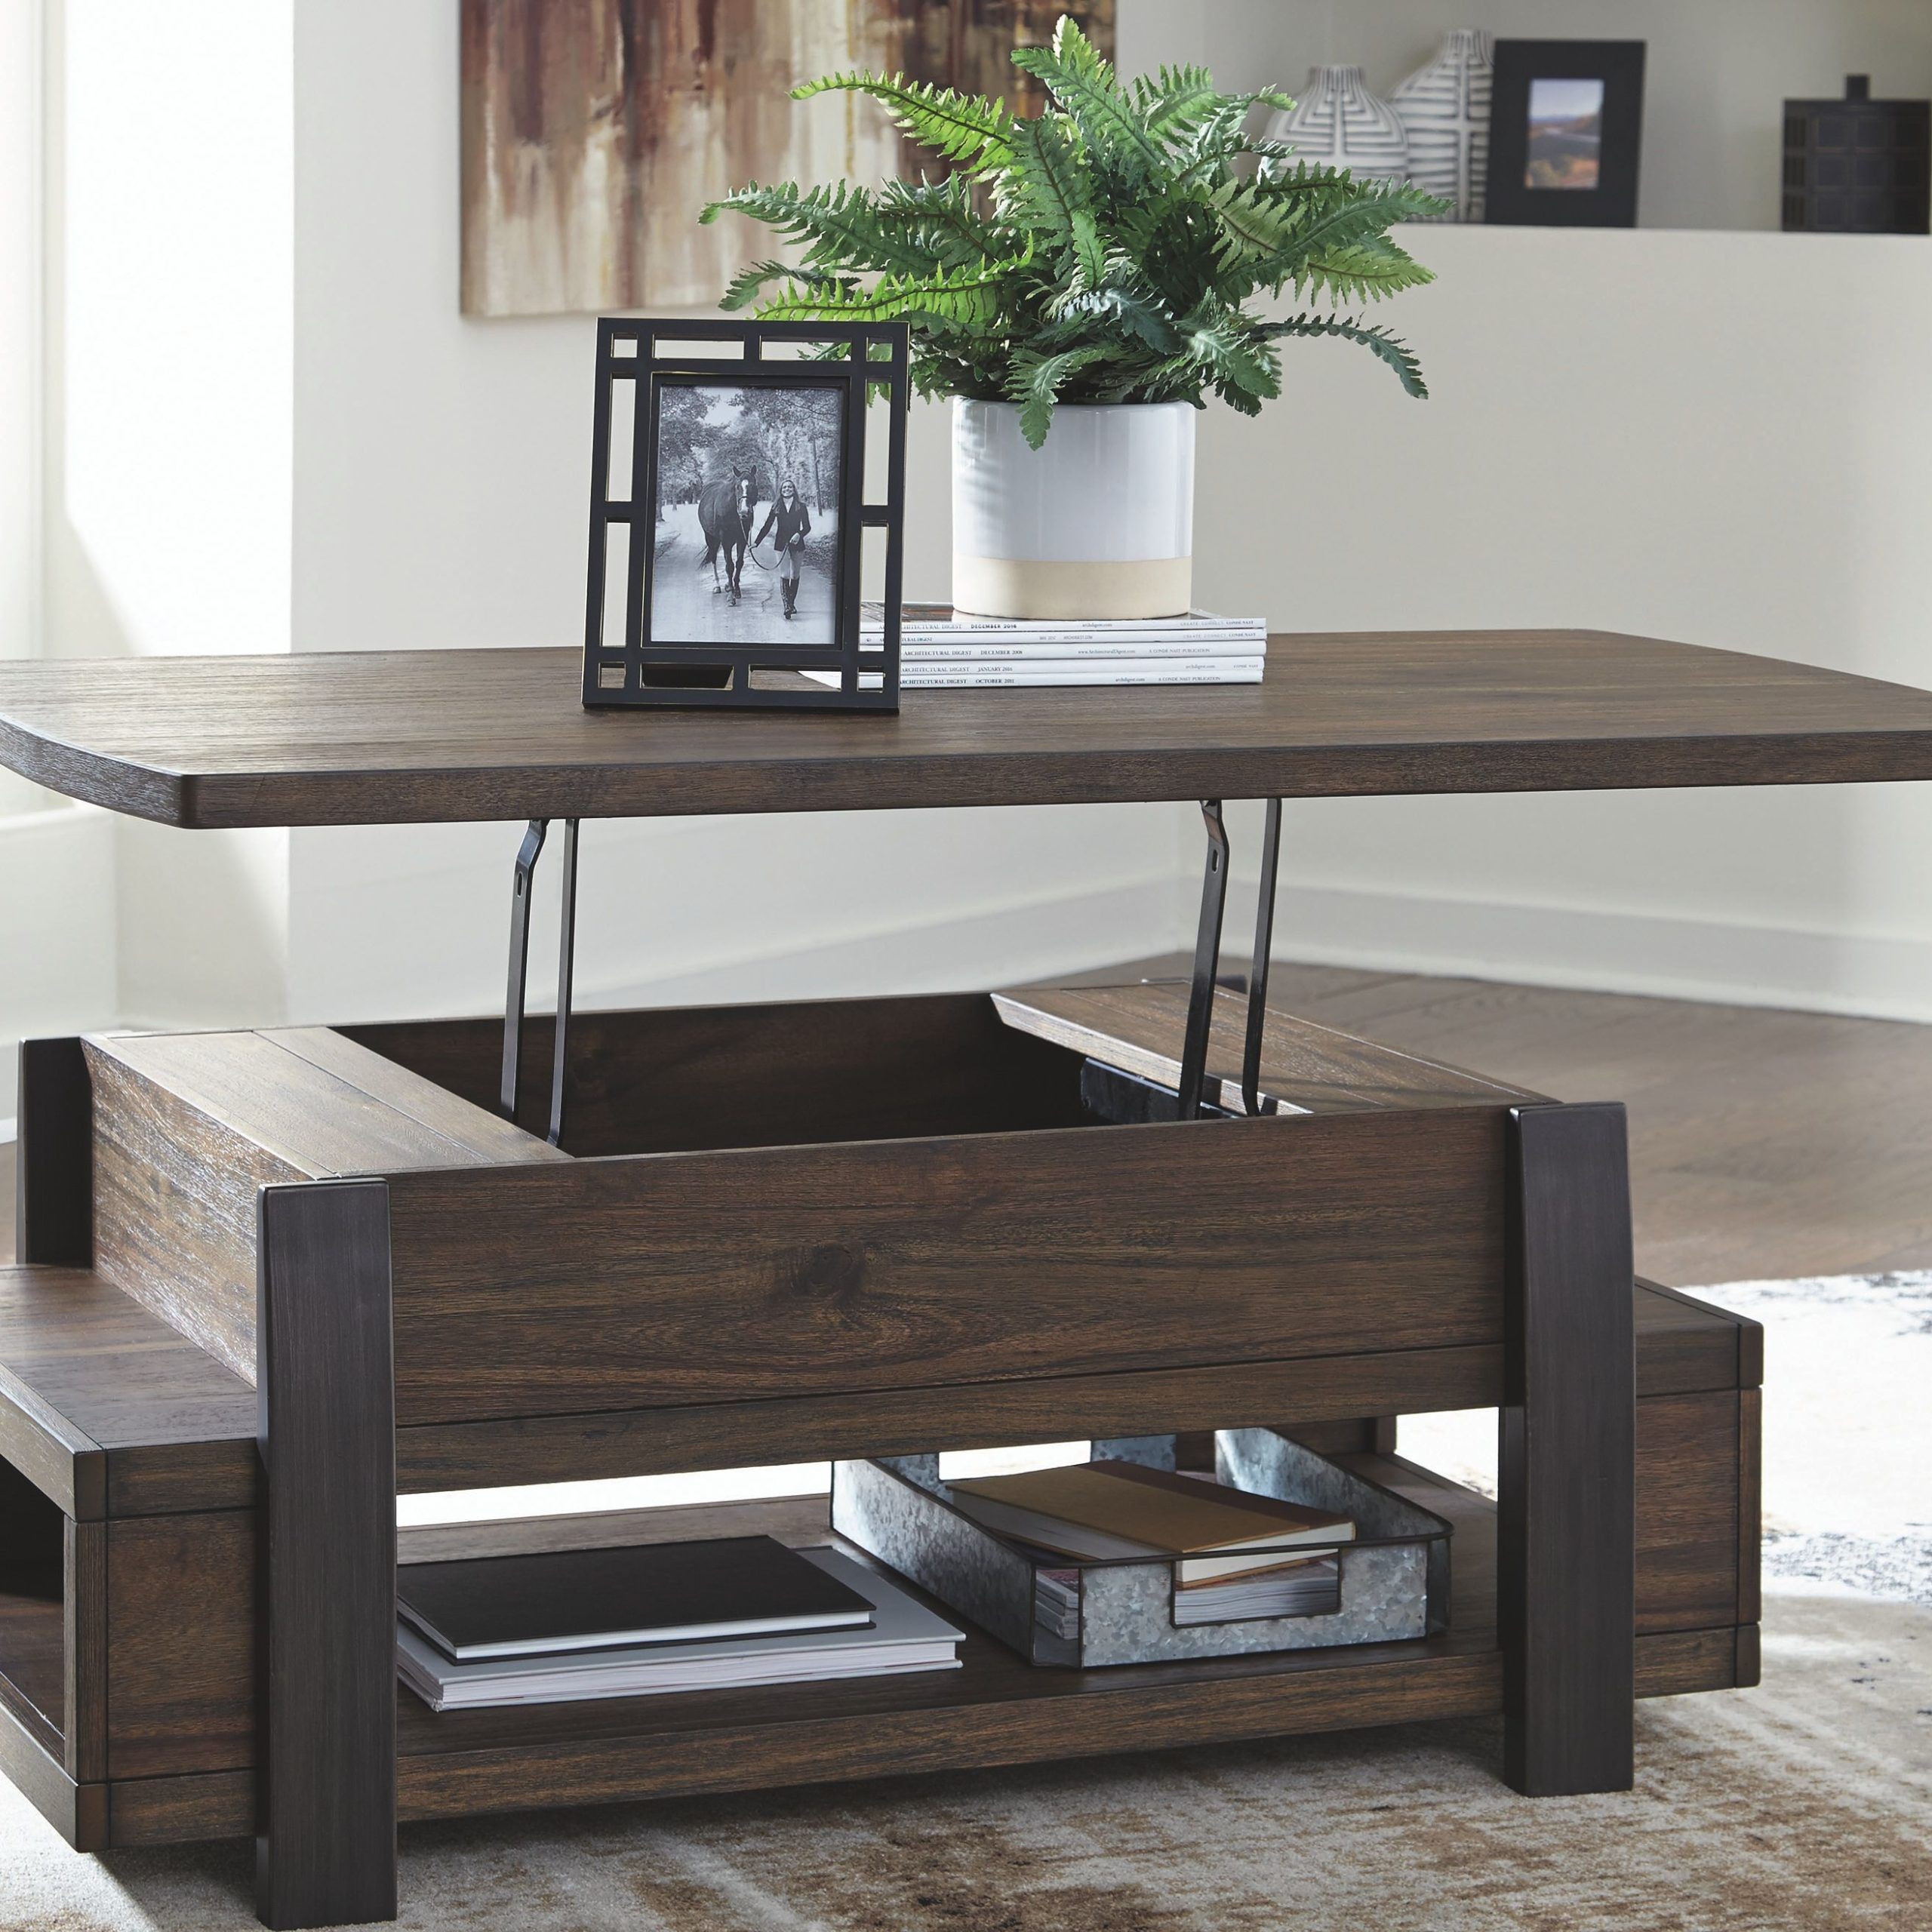 Vailbry Coffee Table With Lift Top, Brown | Lift Top Coffee Table Intended For Lift Top Coffee Tables With Shelves (Gallery 12 of 20)